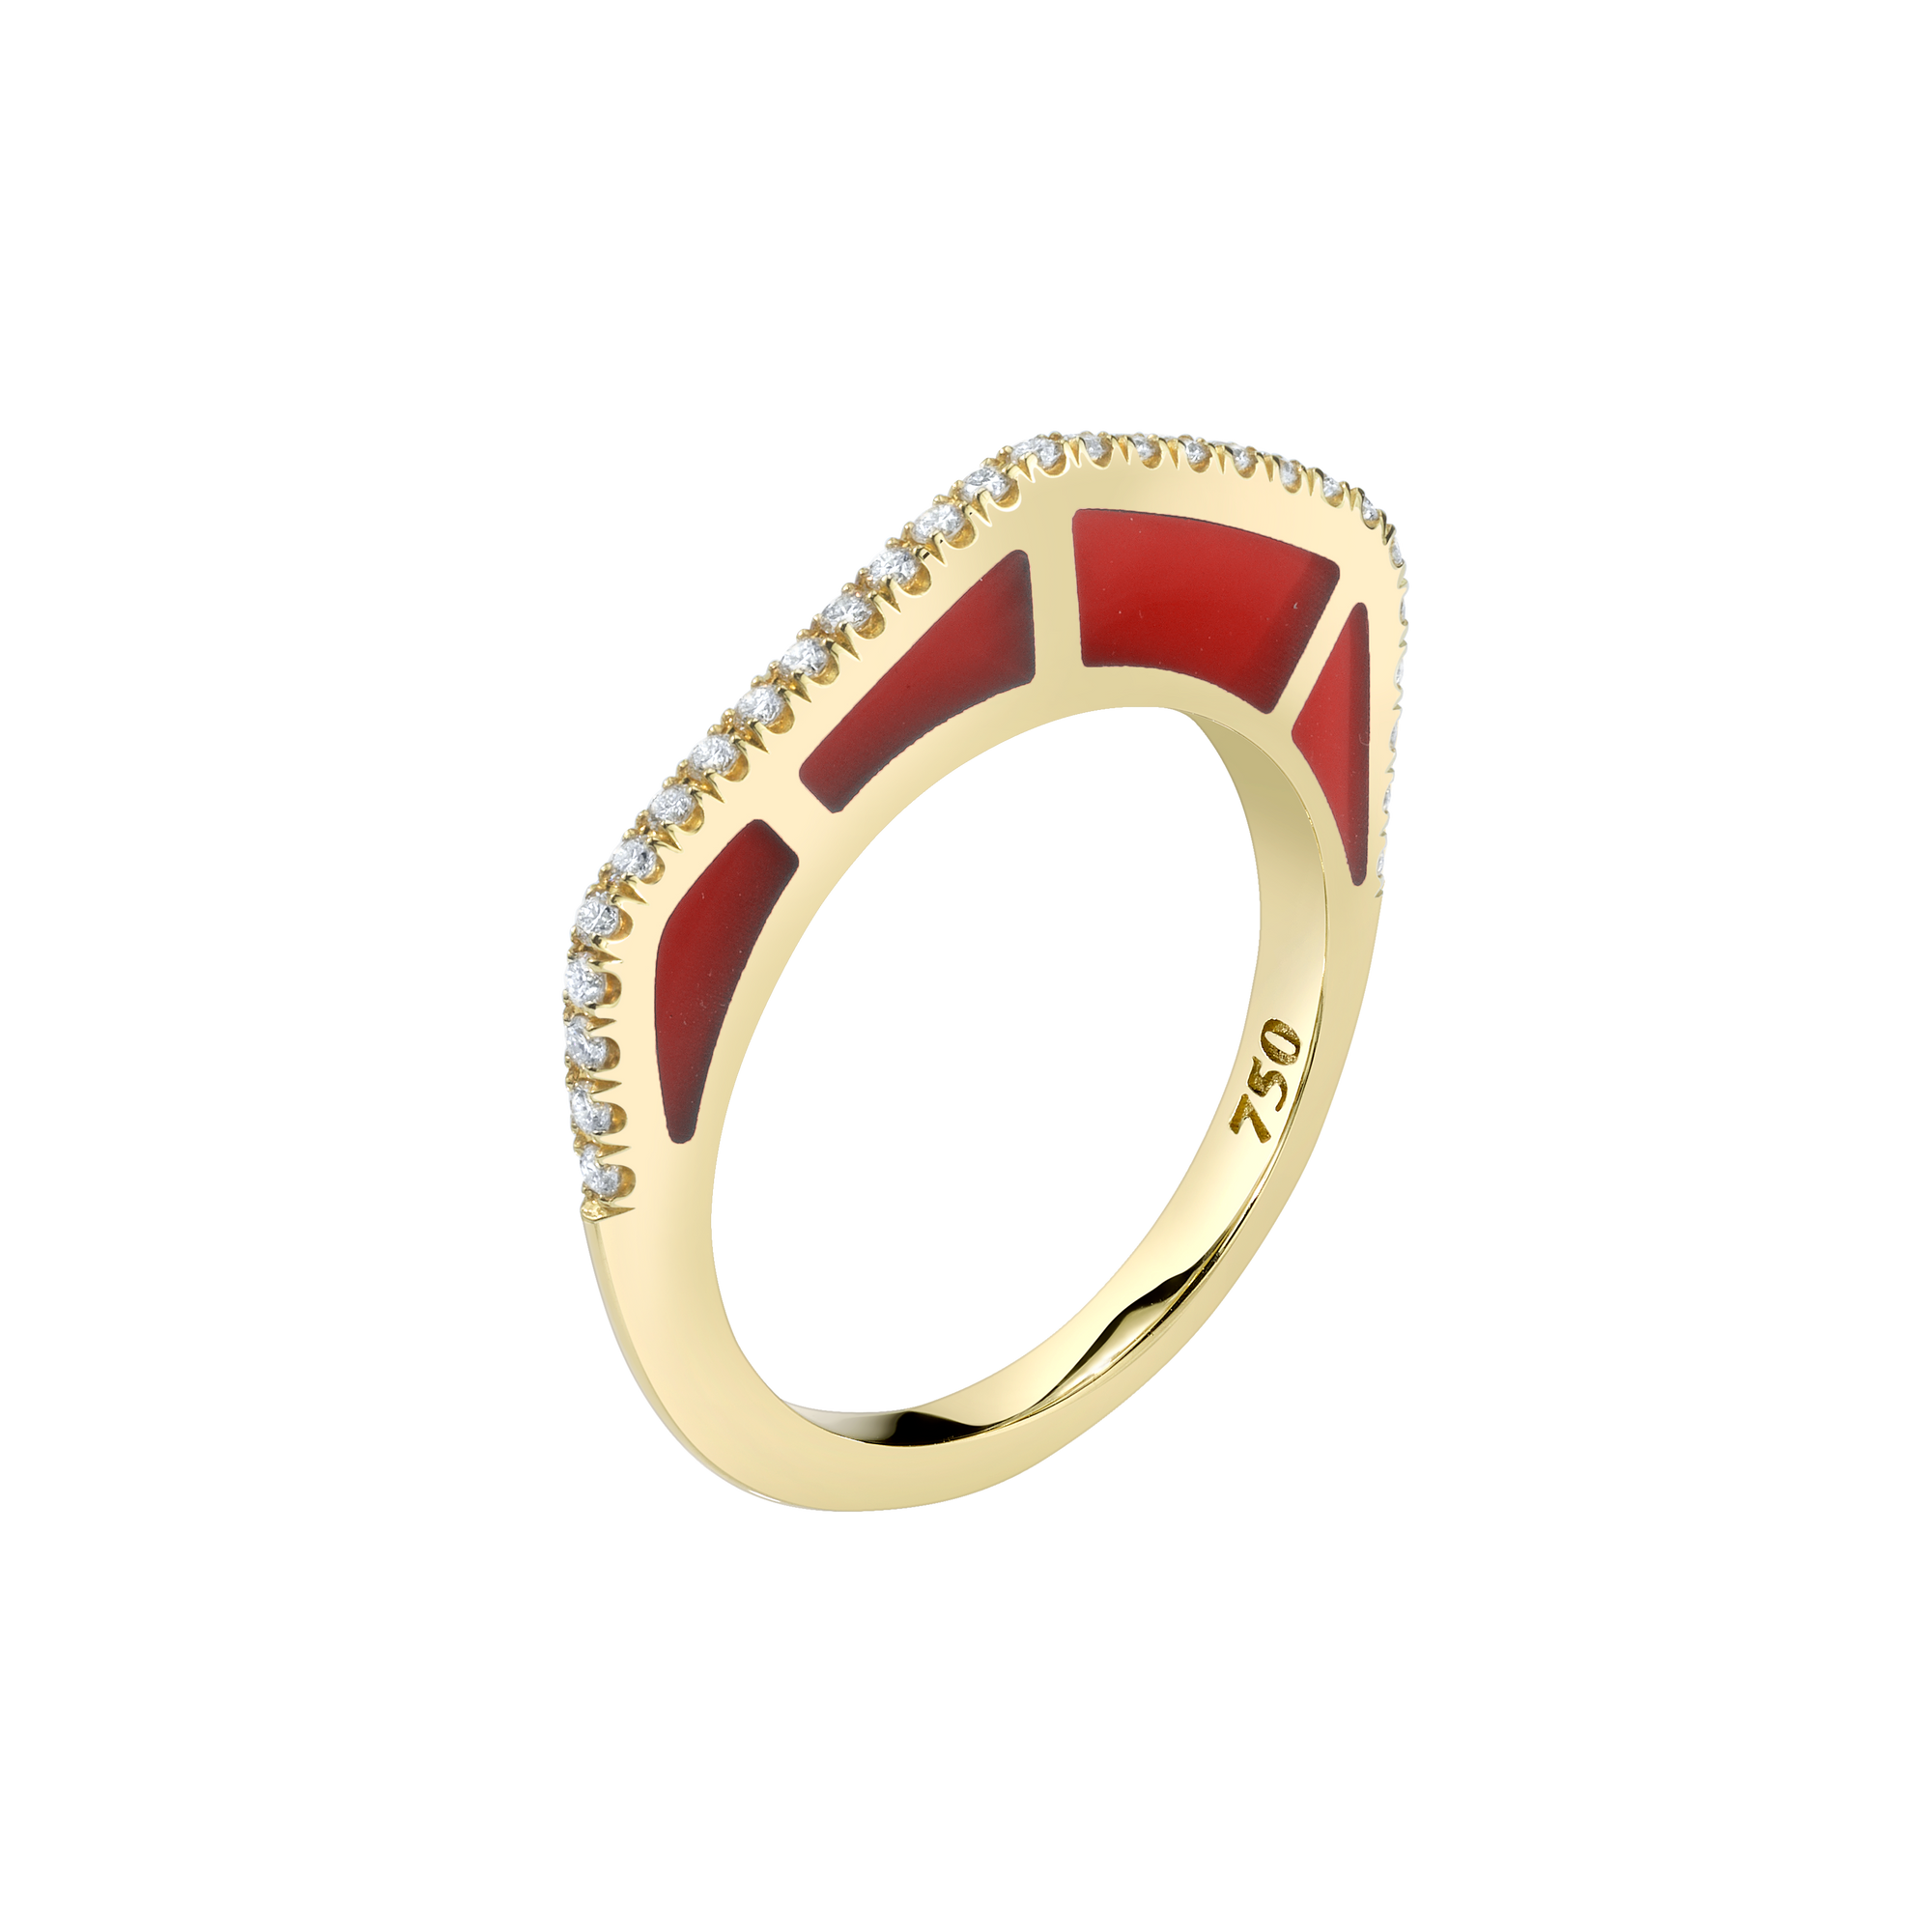 Cobra Ring with Red Enamel and Diamond Pave